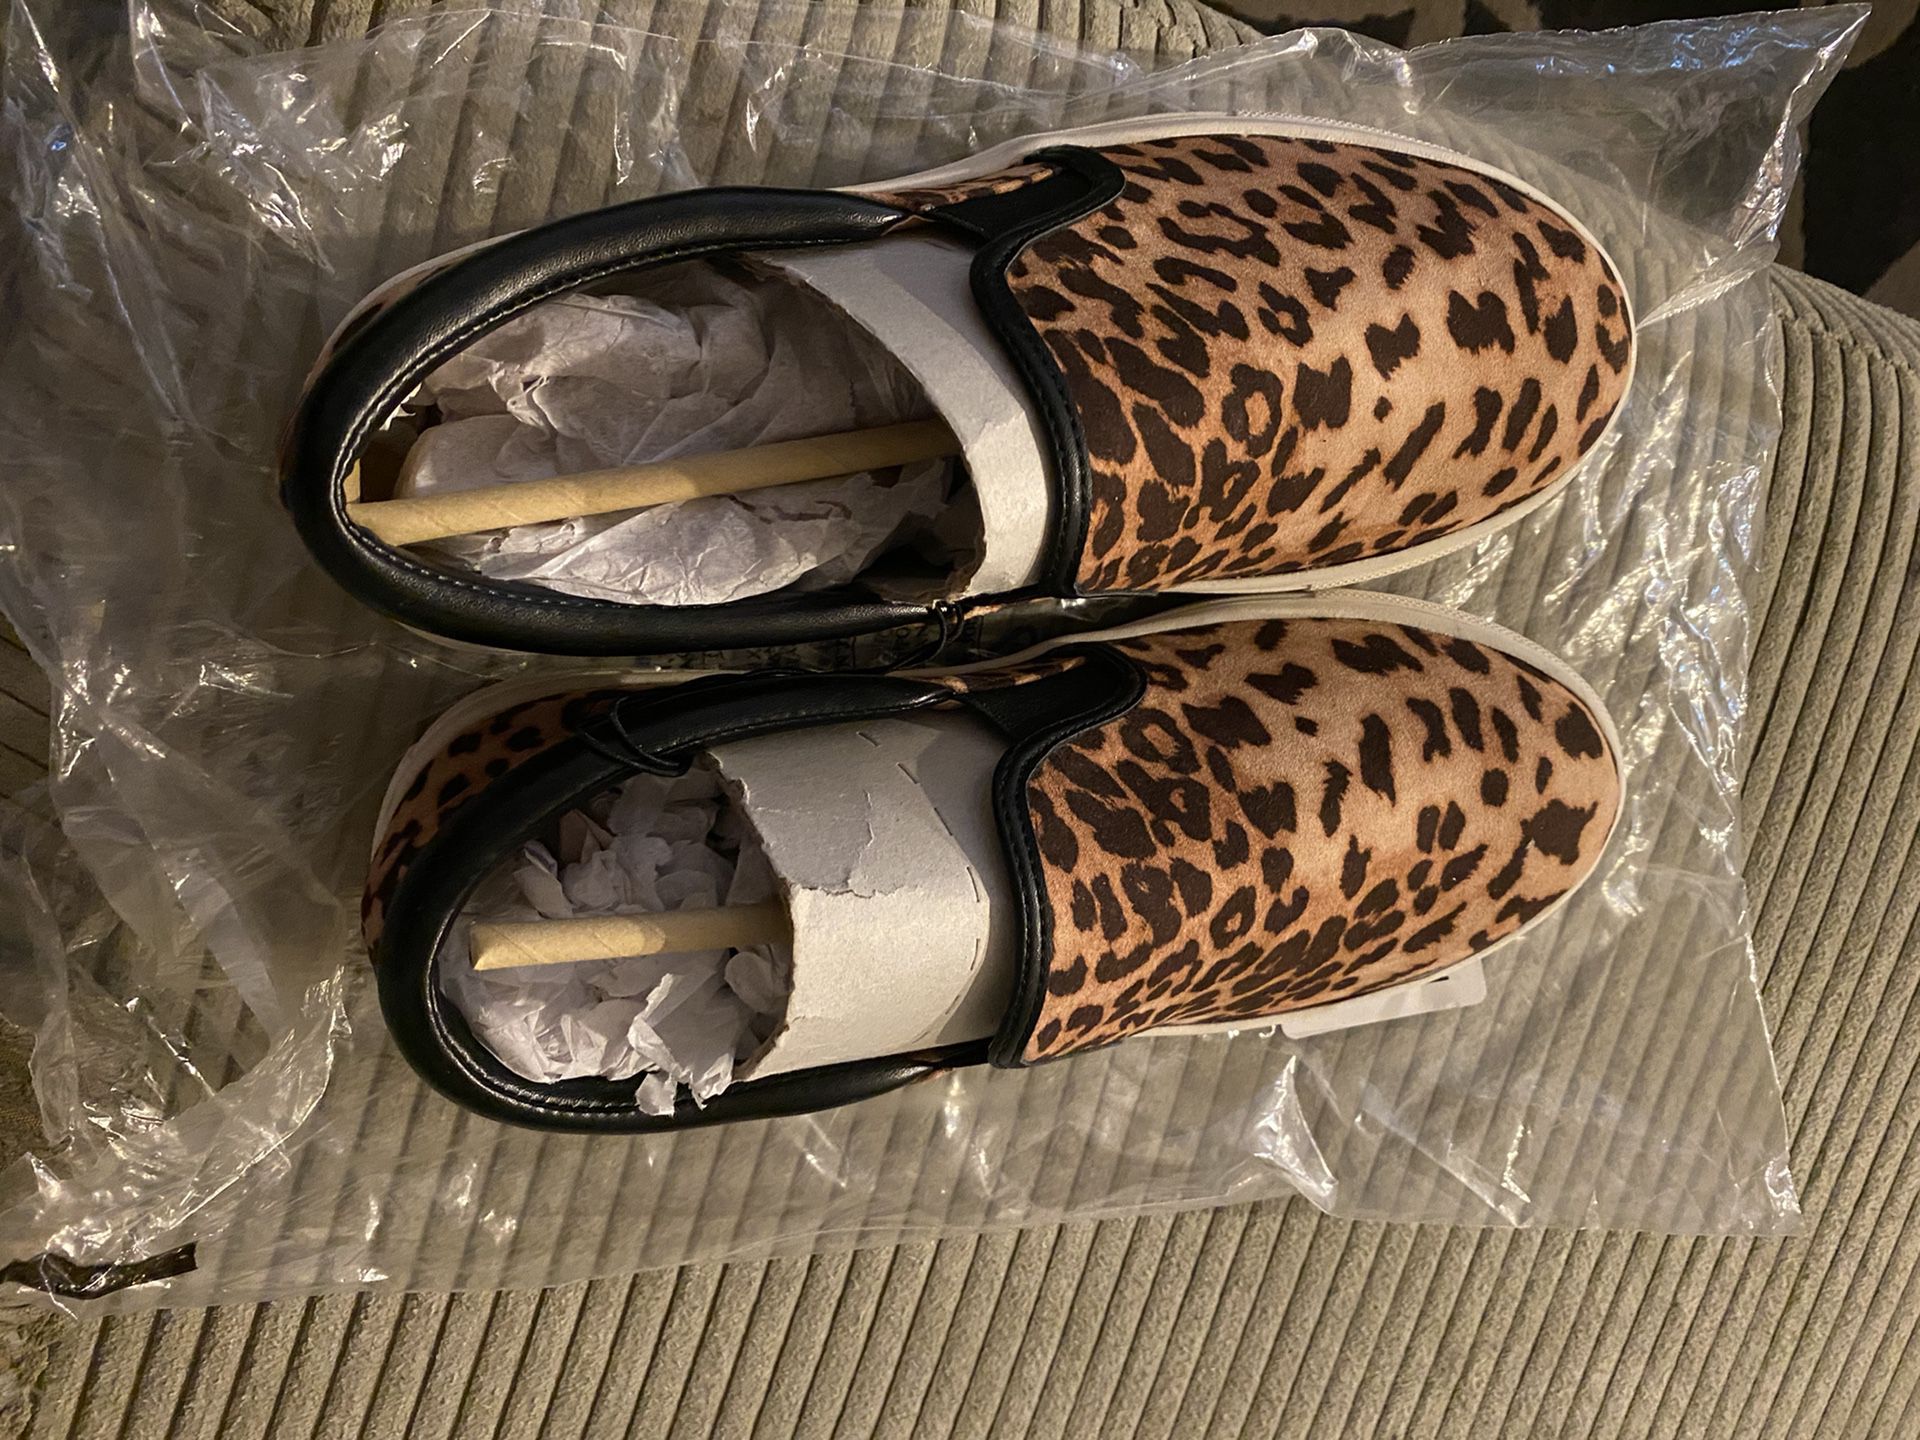 Brand new Women’s slip-on shoes size 7 1/2 wide